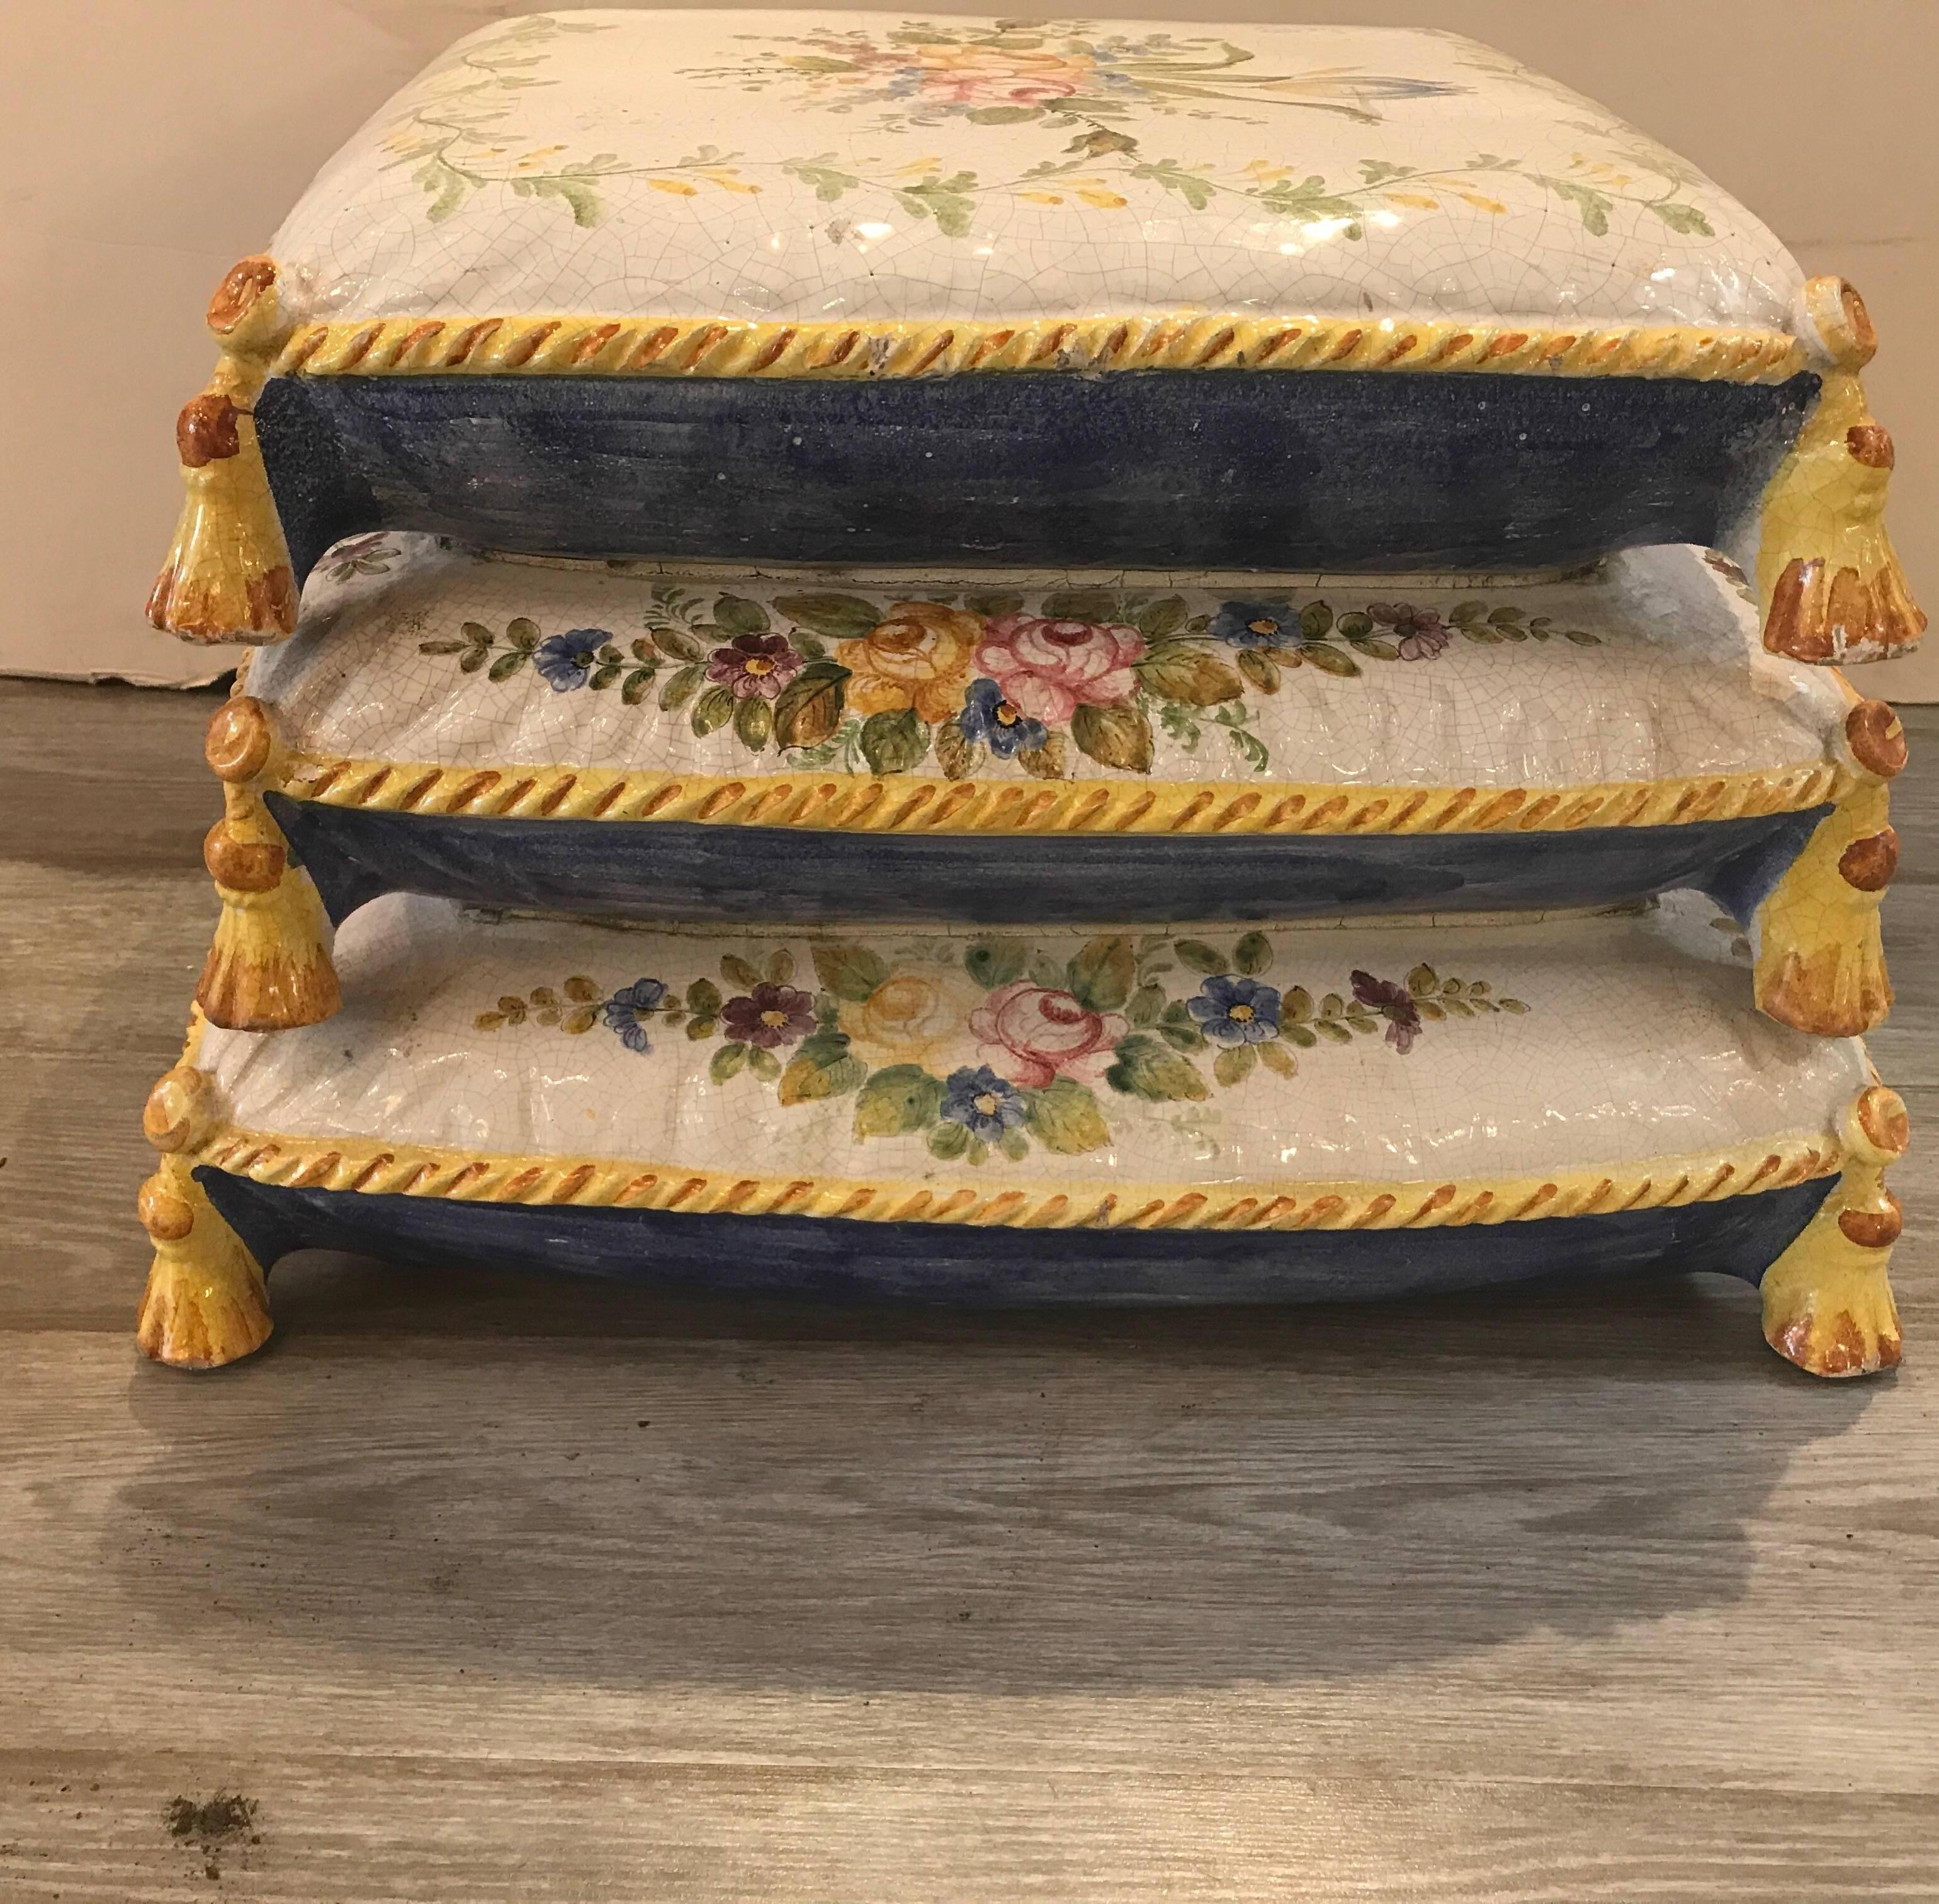 Whimsical hand-painted garden seat in the form of pillows. The painted floral decoration on the top and sides with yellow cording and tassels at the corners.